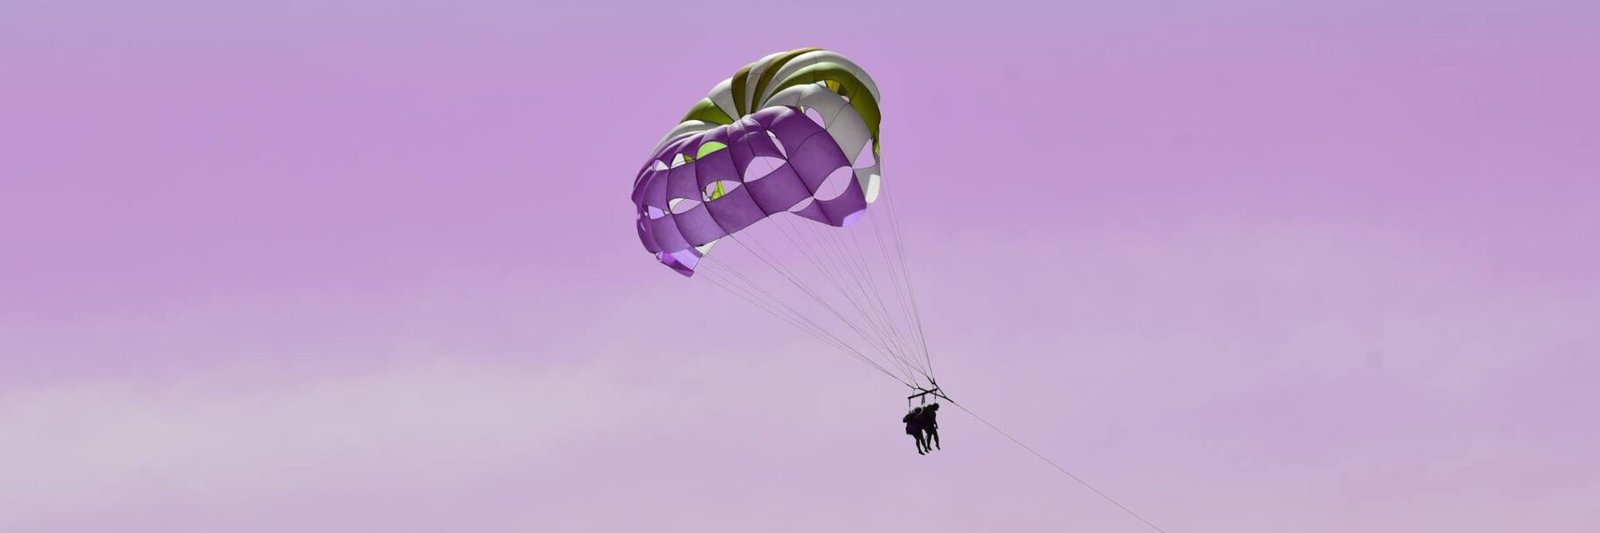 Beginner's Guide to Parasailing